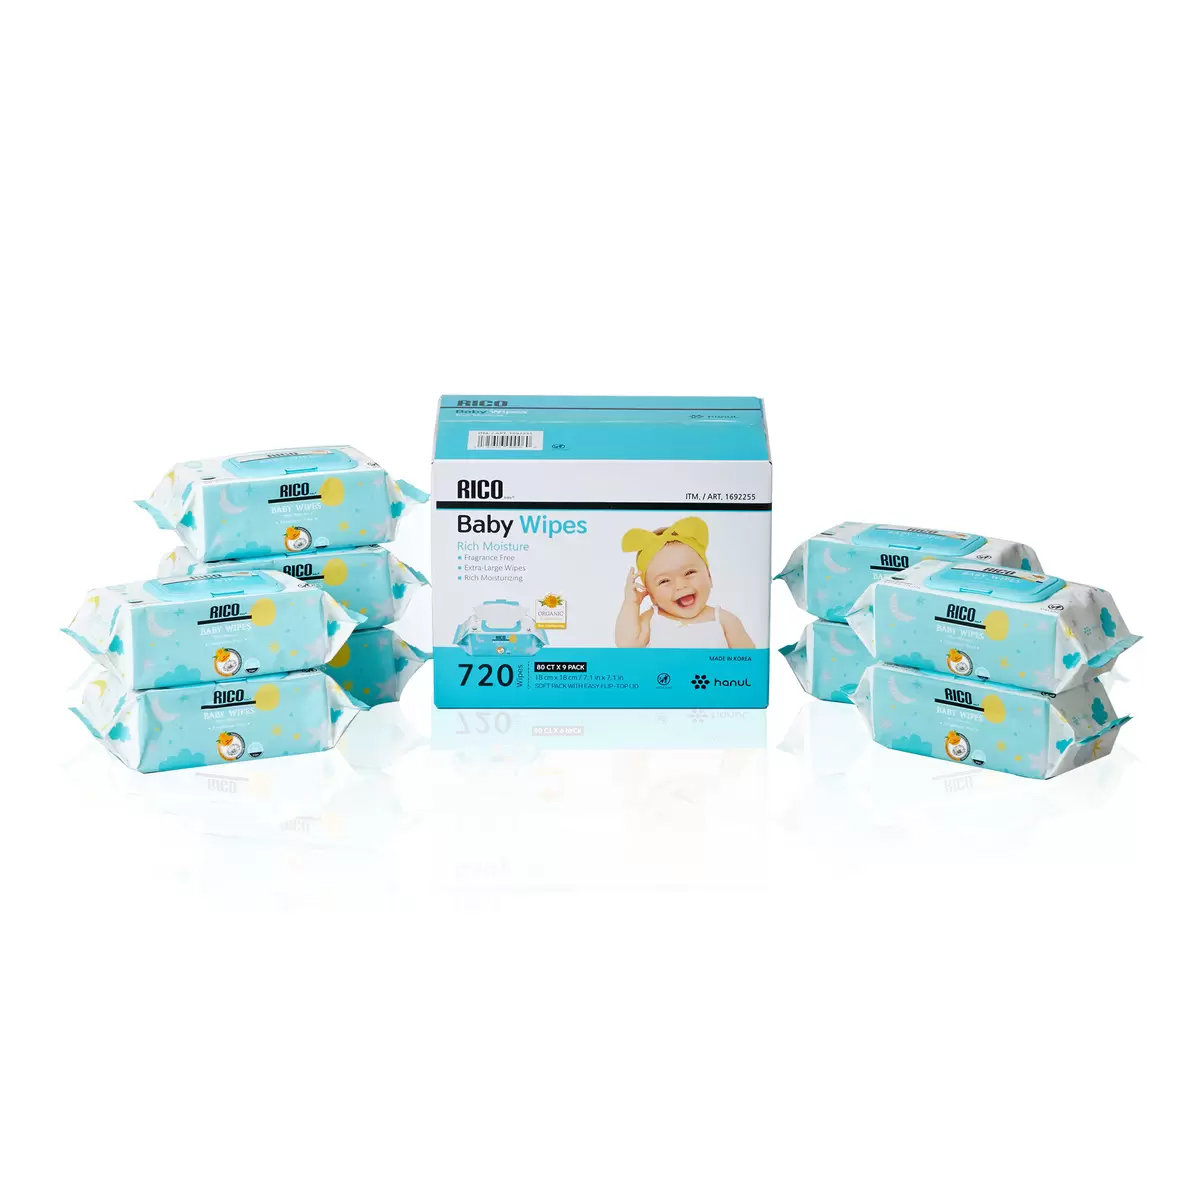  baby. pre-moist wipes Rico baby wipe s80 sheets ×9 pack go in 720 sheets insertion RICO BABY WIPES s large size high capacity cost koCOSTCO